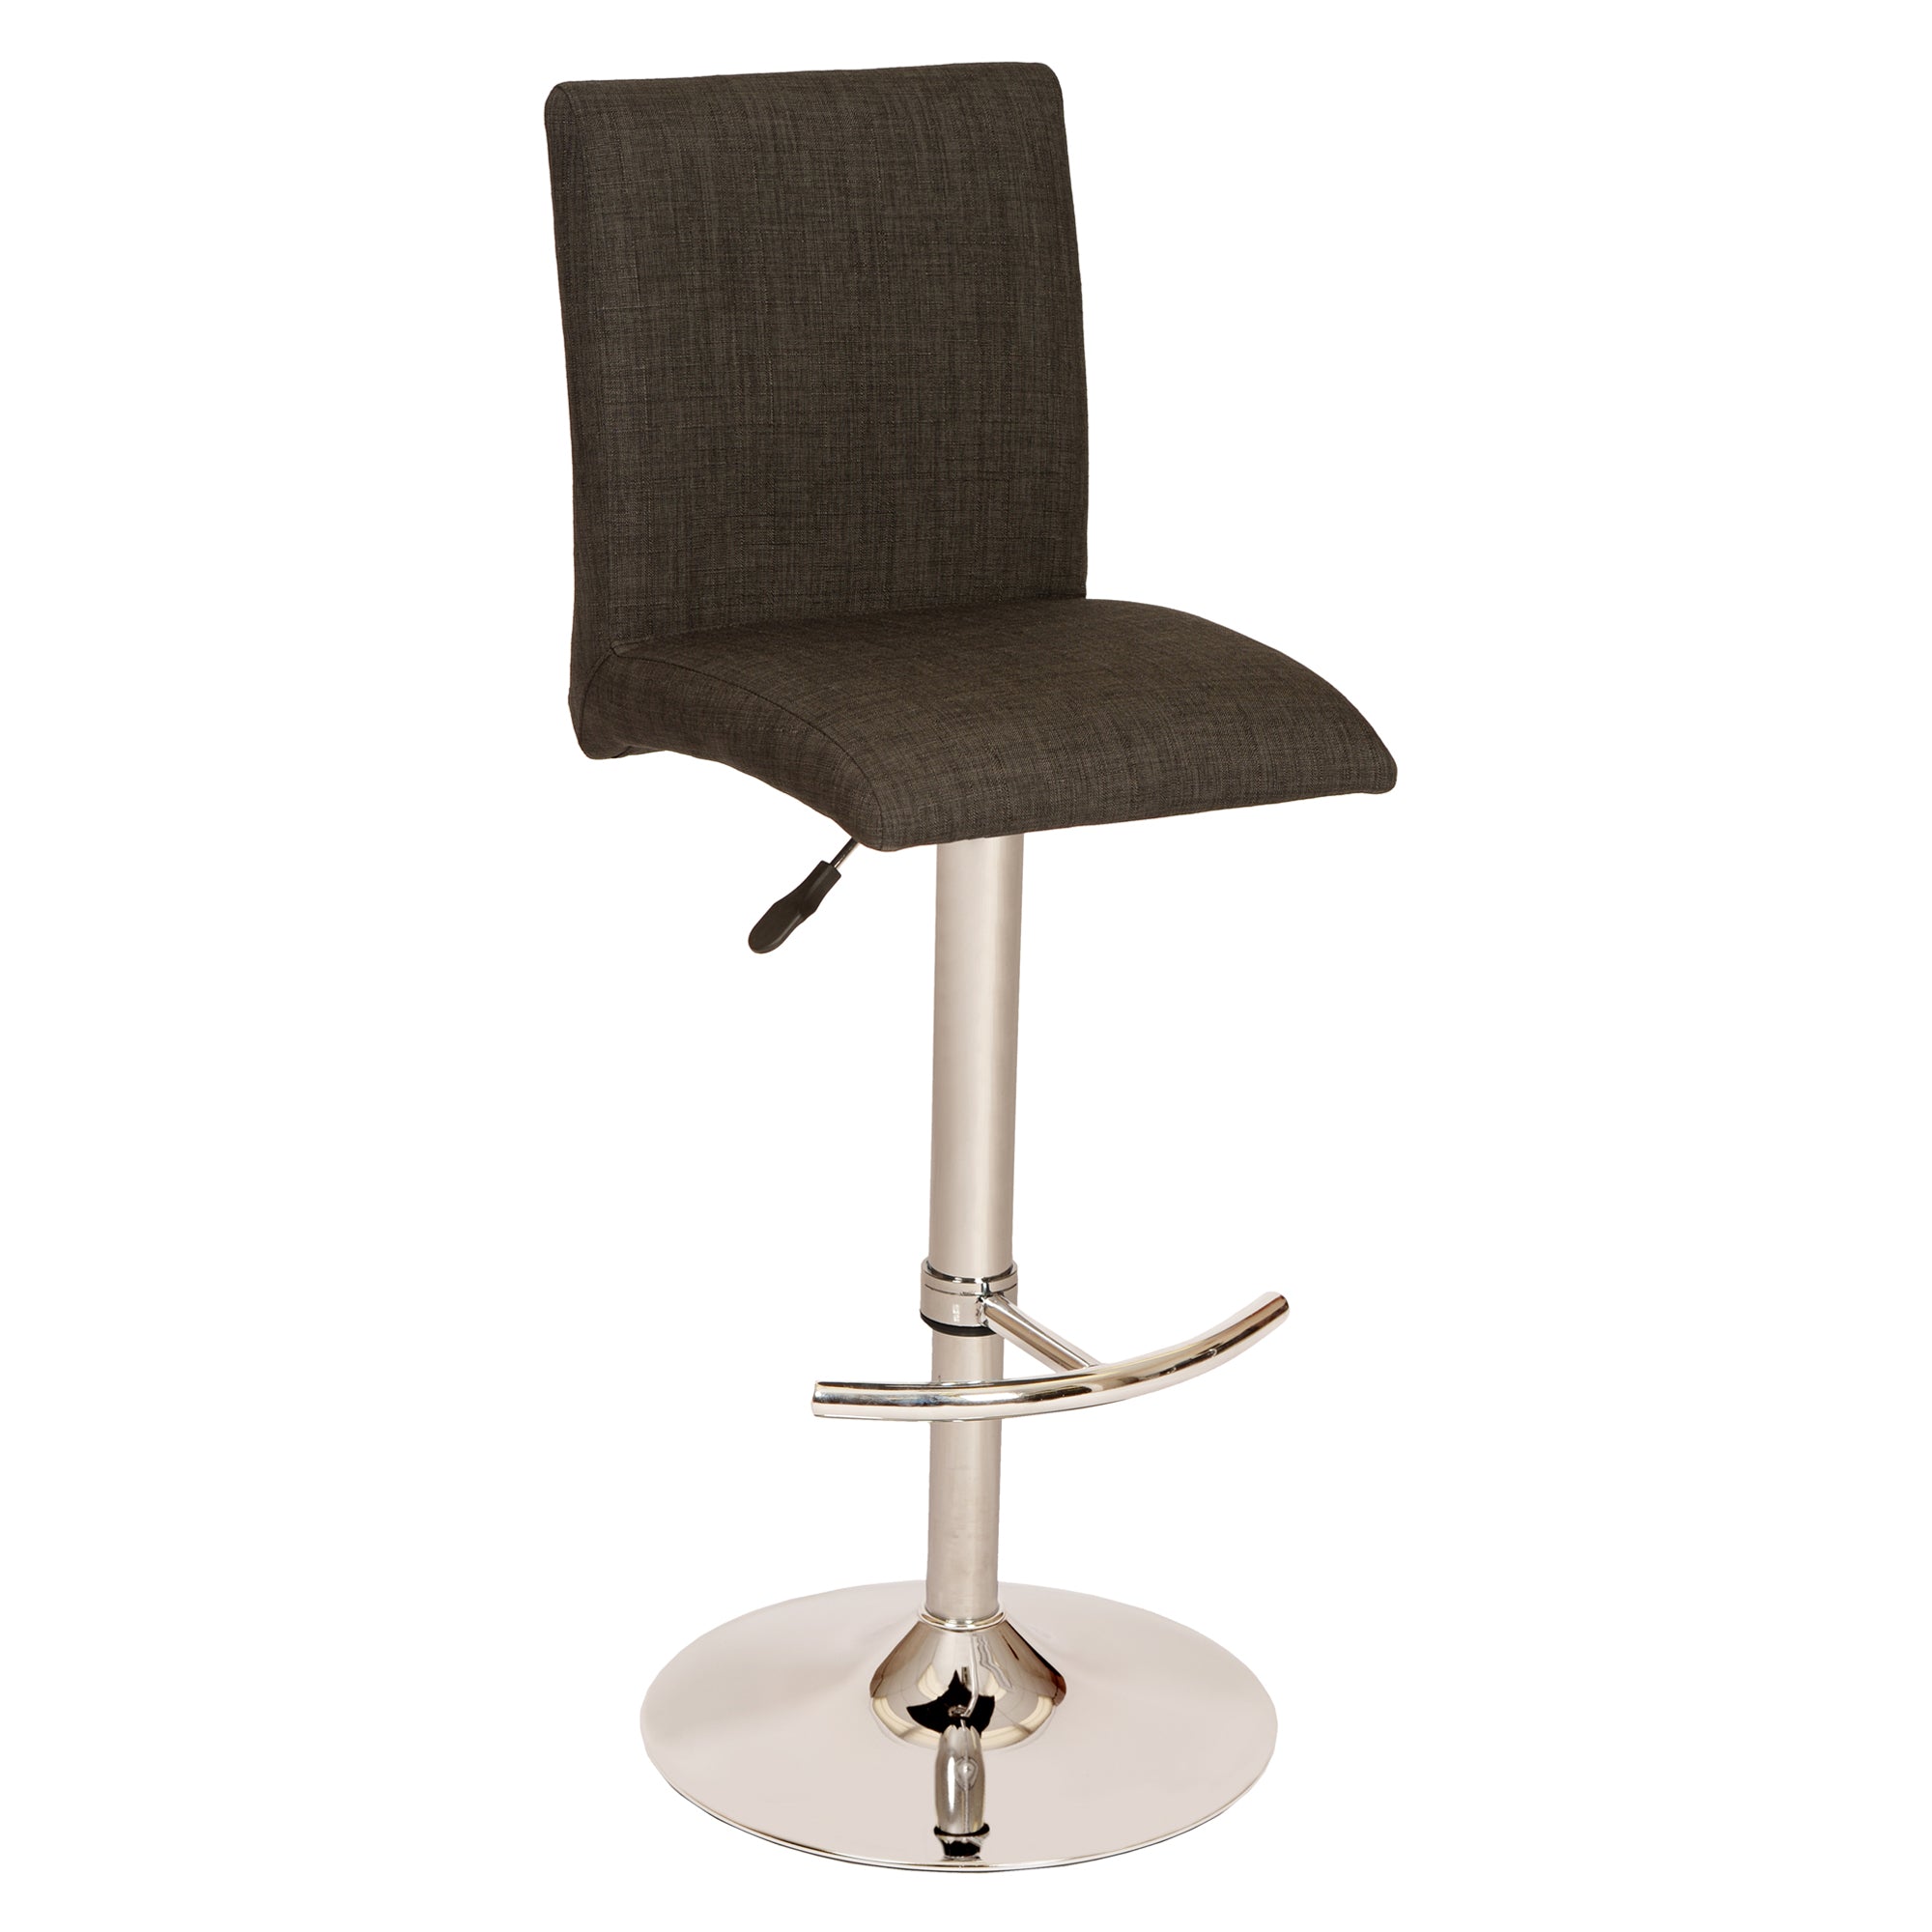 Armen Living Lclbswbach La Jolla Adjustable Swivel Barstool In Chrome Finish With Charcoal Fabric